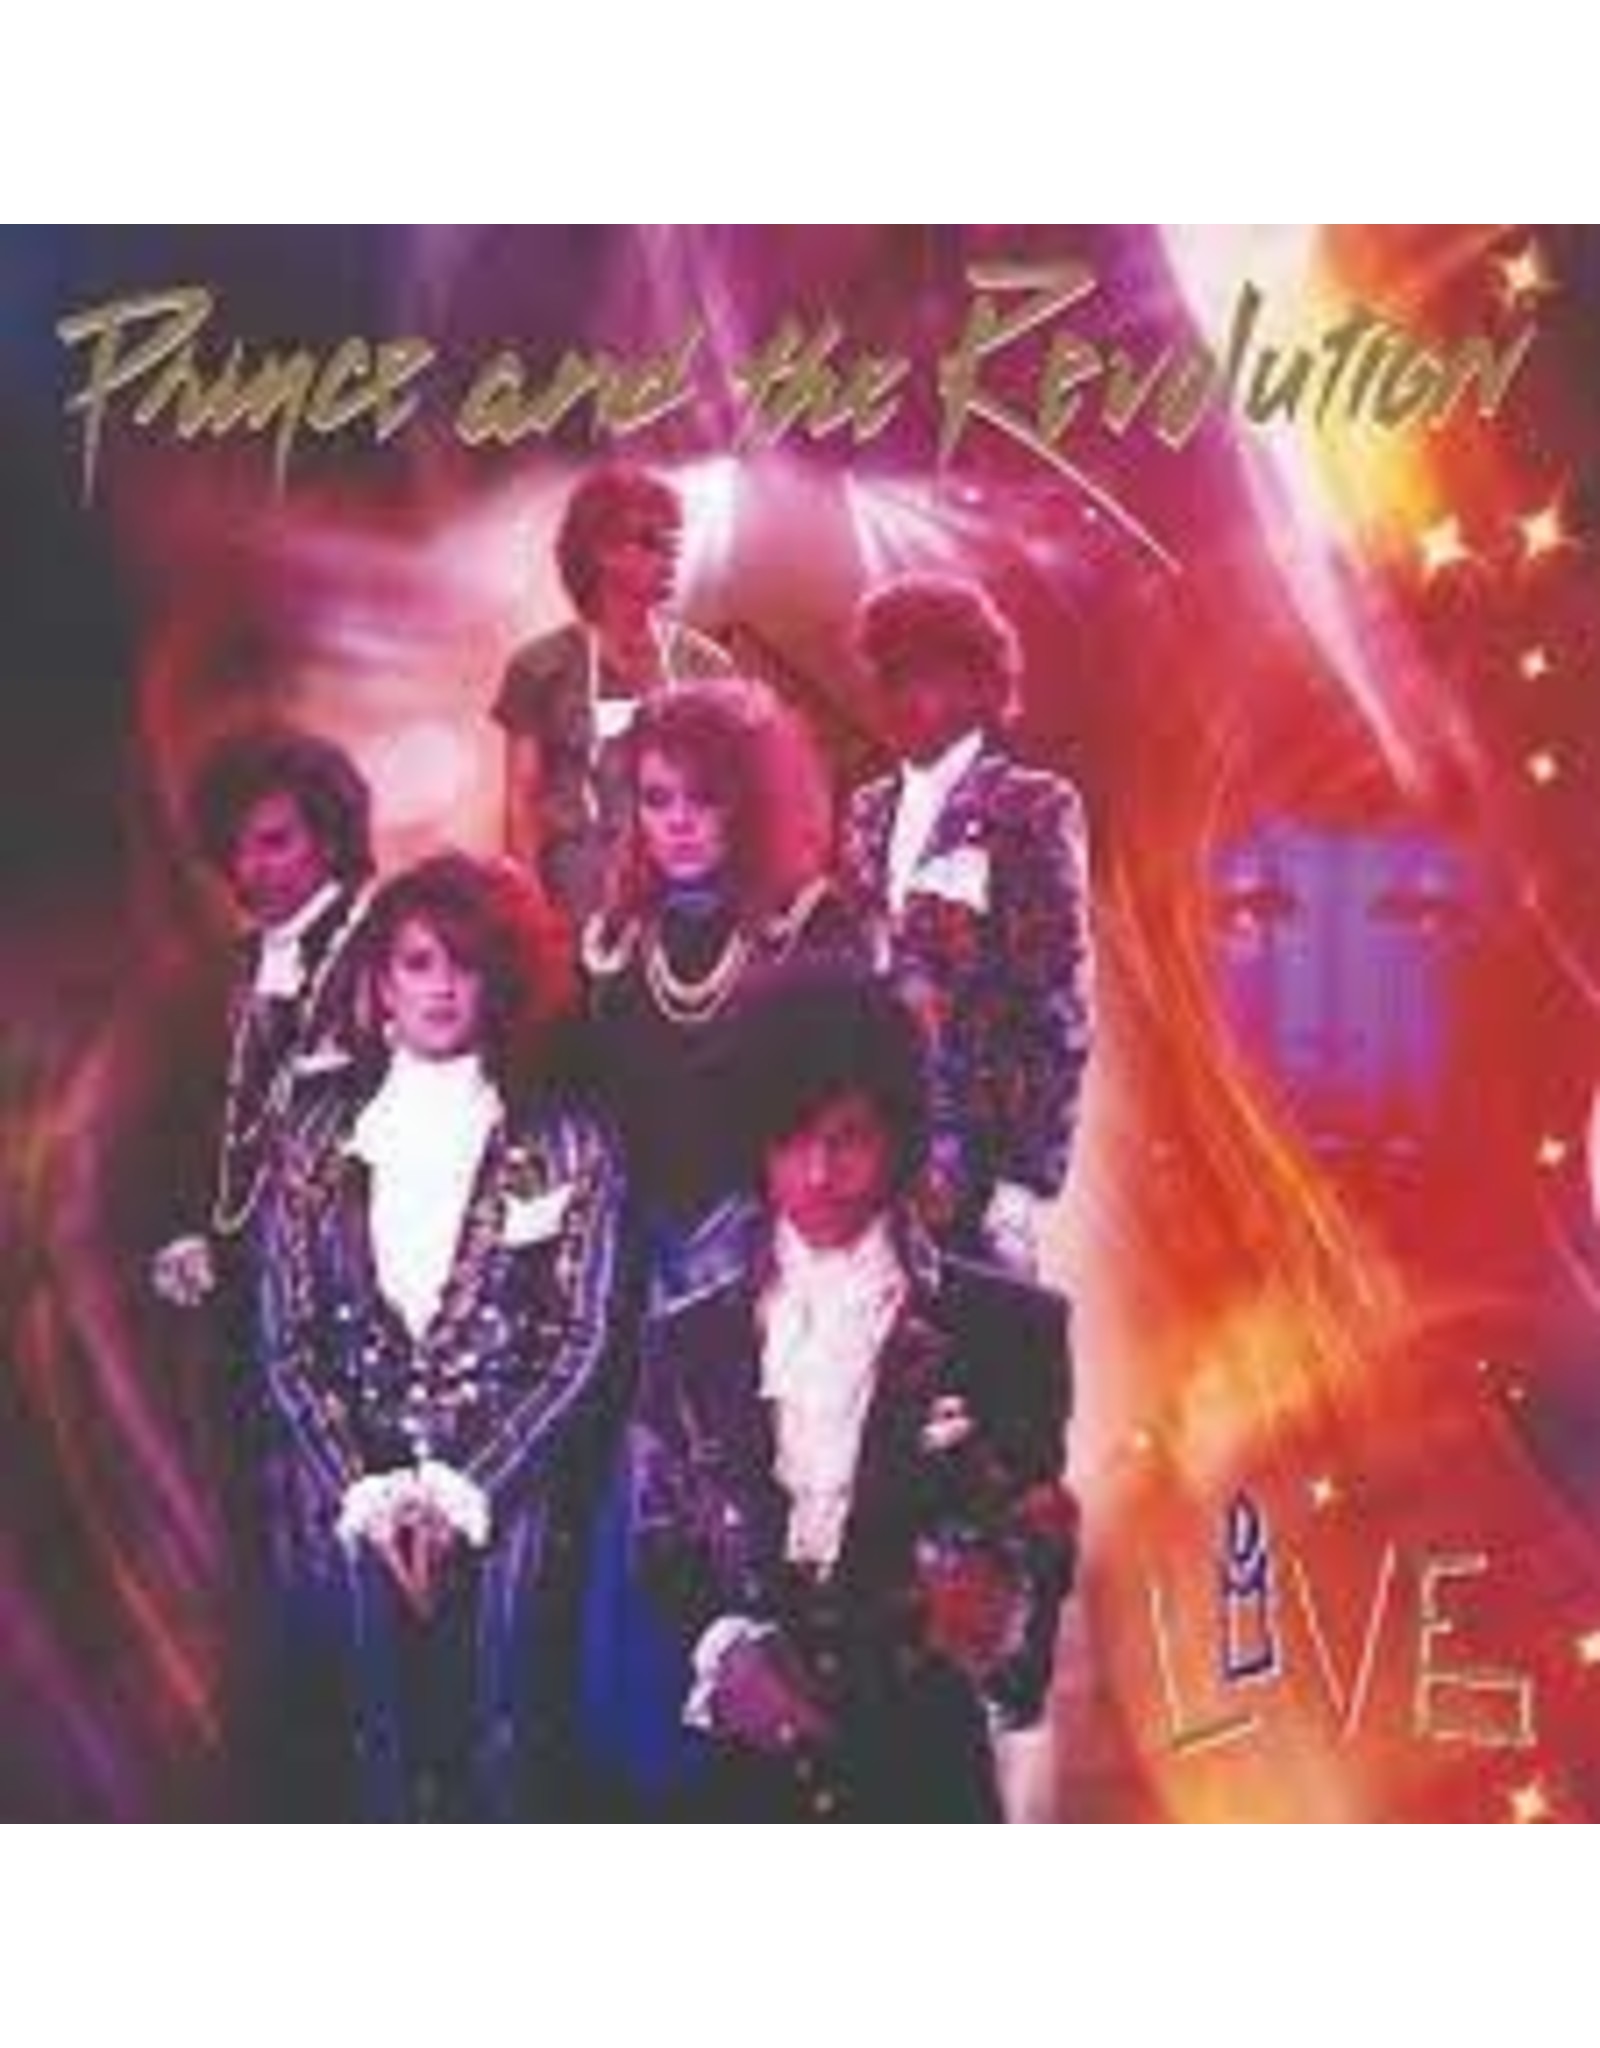 Prince & The Revolution - Live Syracuse 1985  (3LP/150g/remixed & remastered)